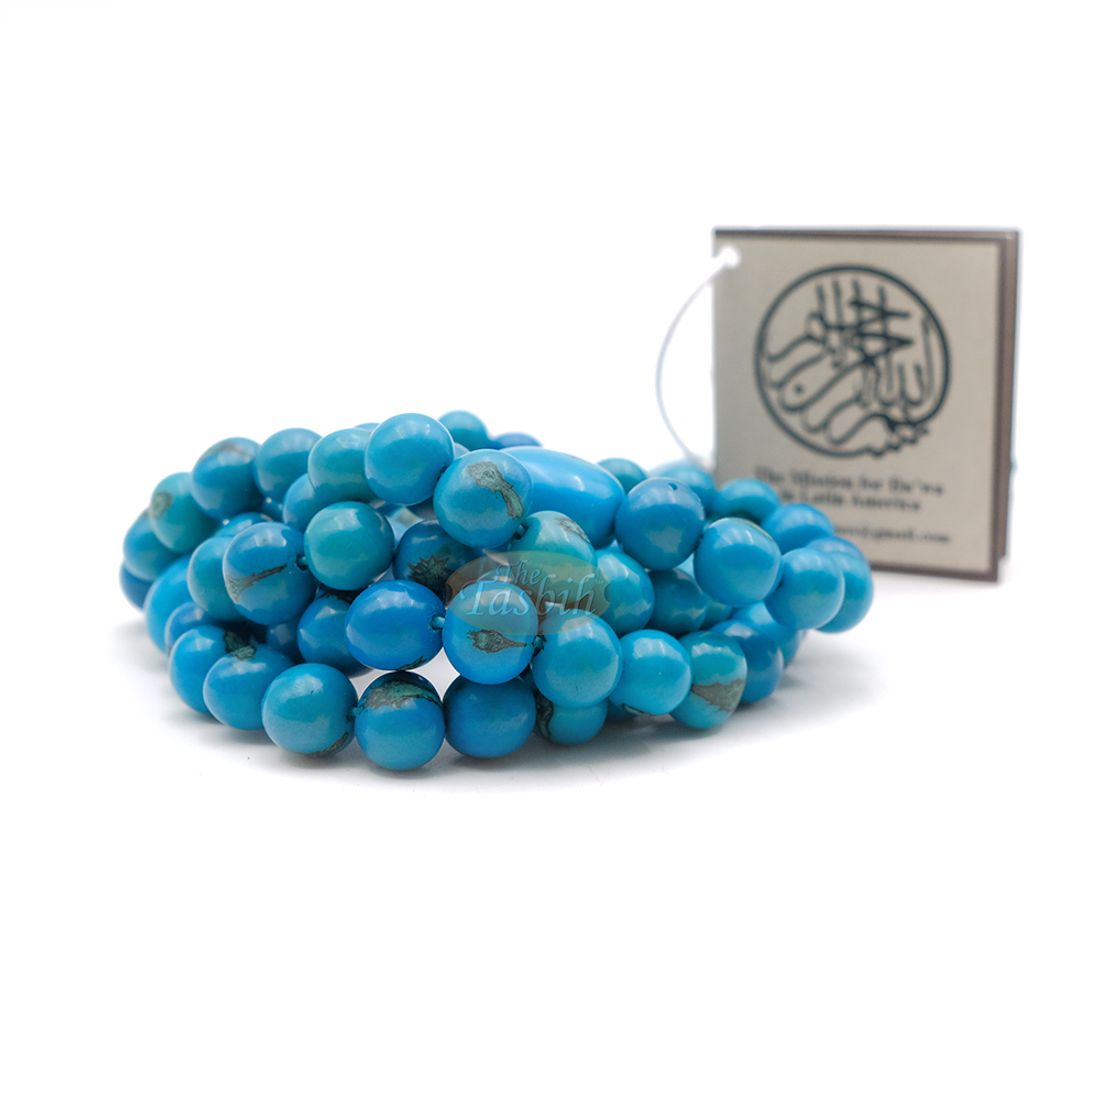 Light Cobalt Blue Natural Colored Dye Eco-friendly Sustainable Original Açai Seed 9mm Beads Traditional Tasbih